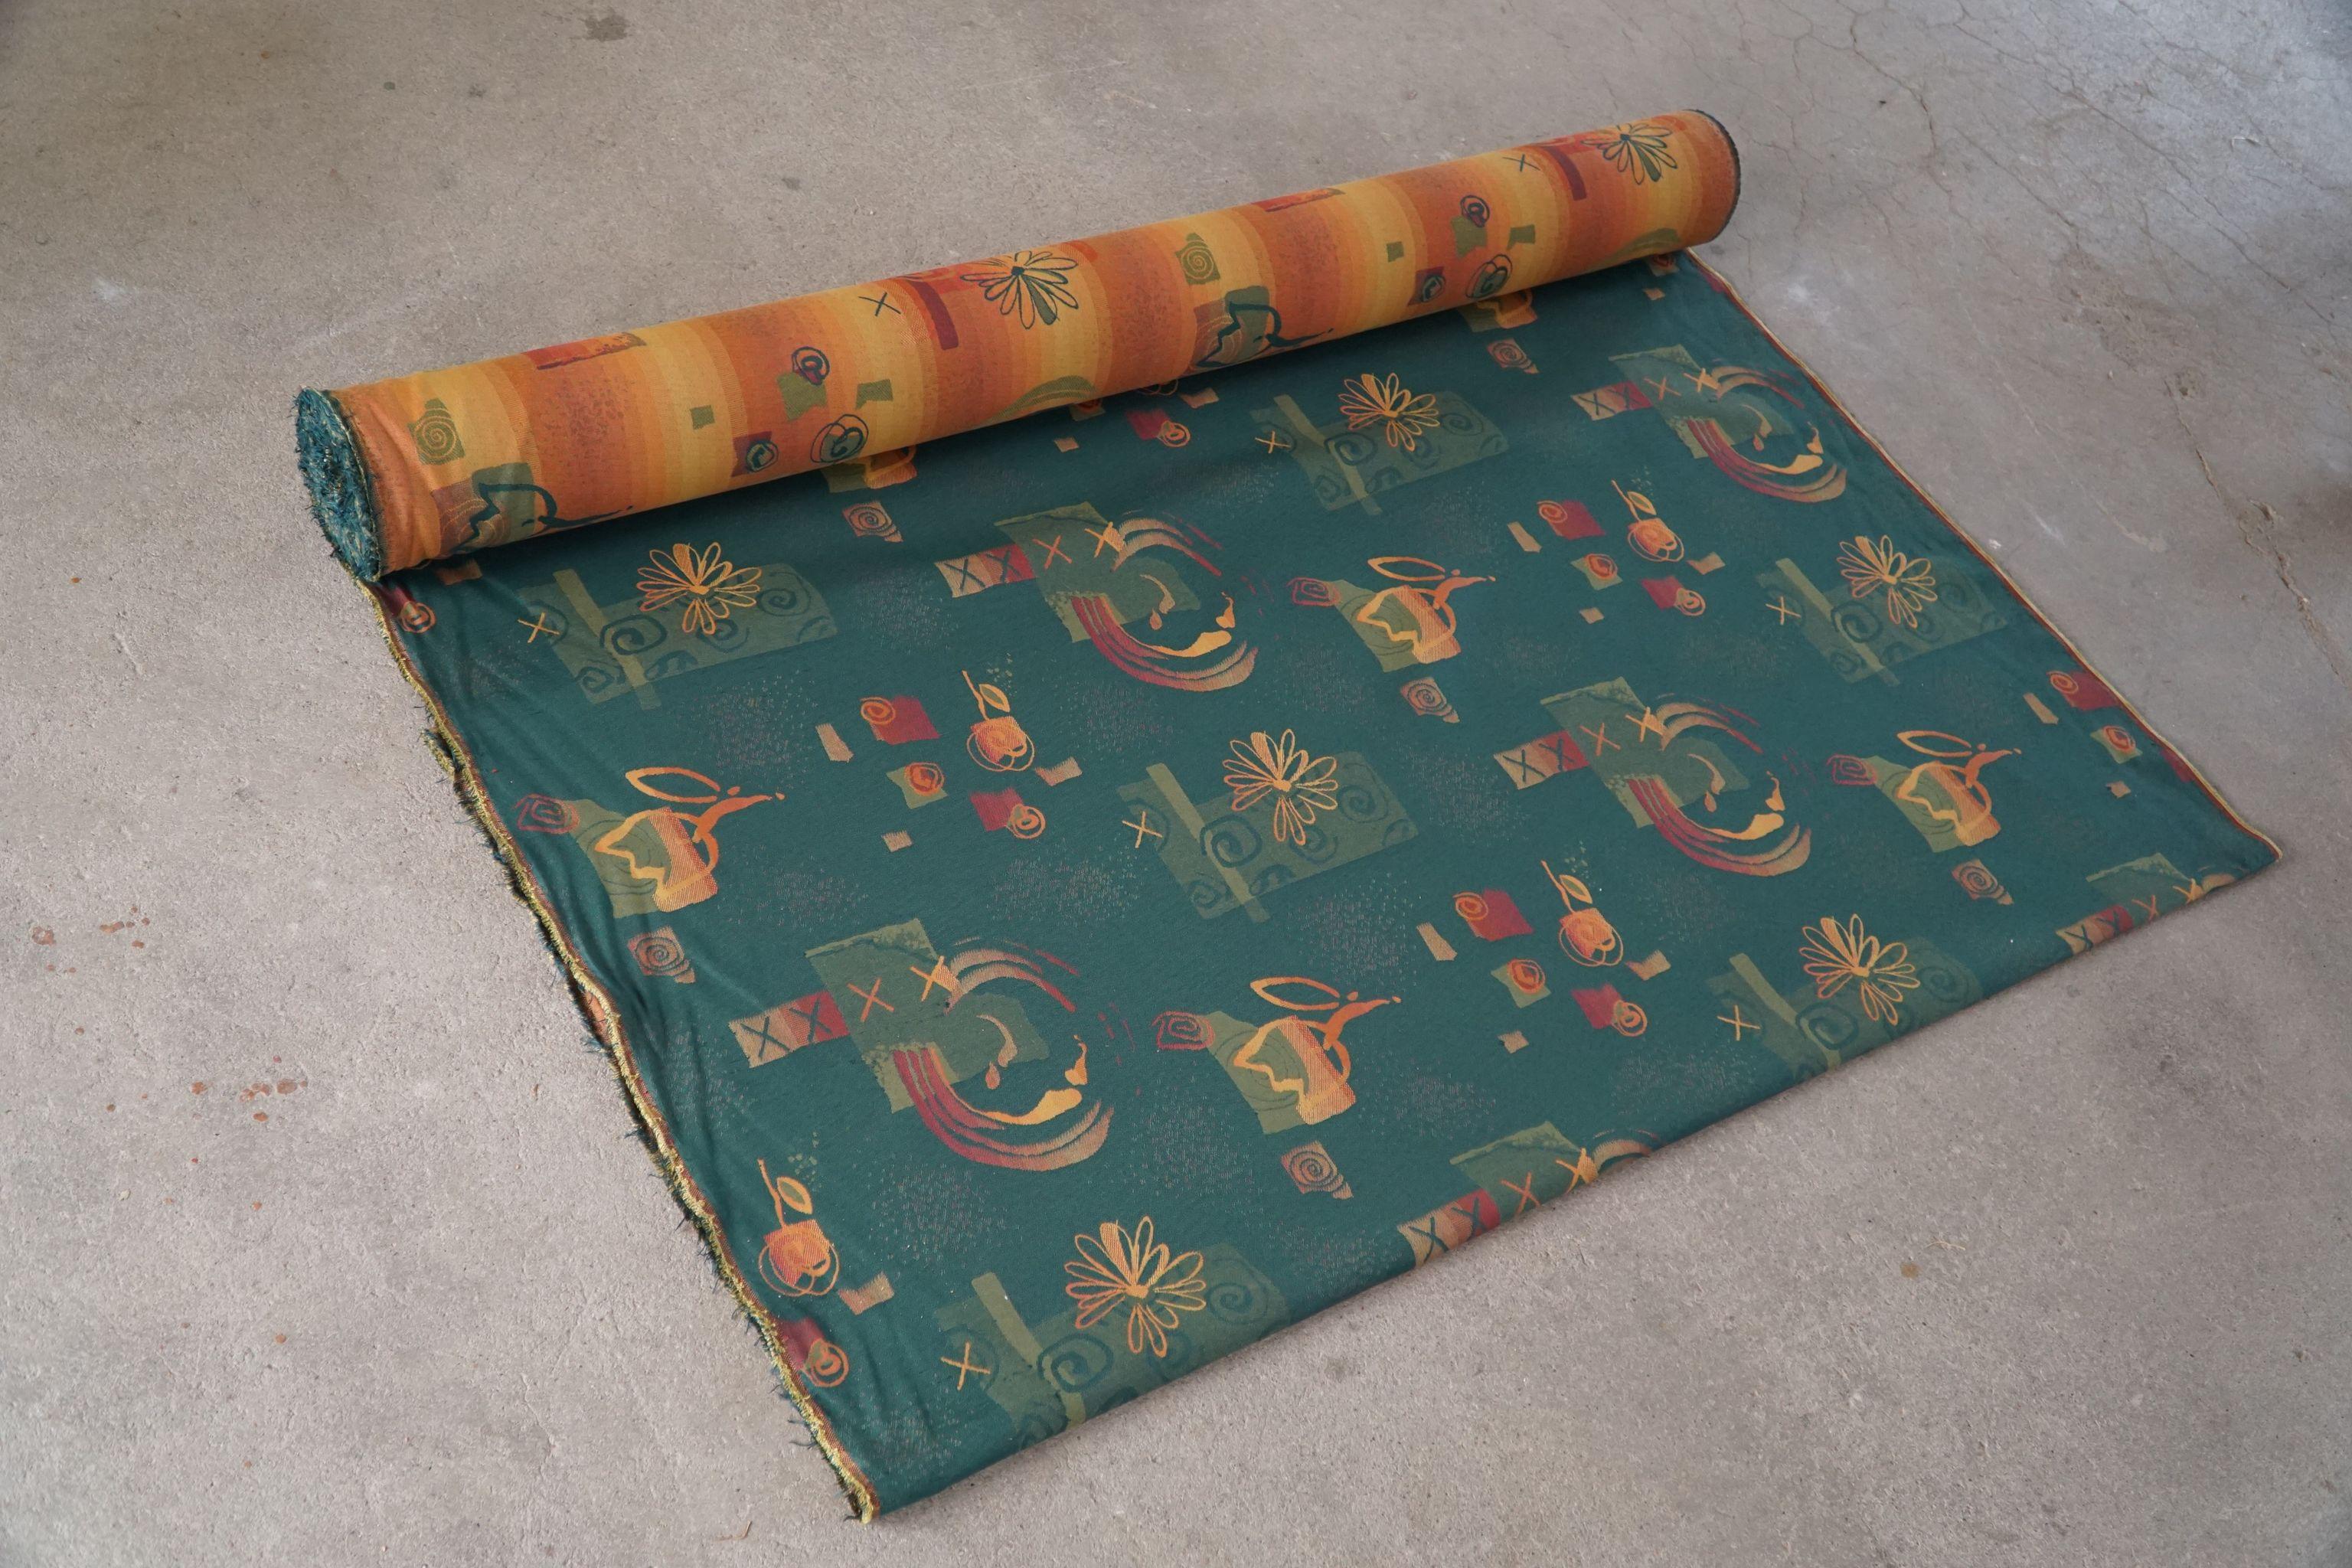 Vintage Gobelin Upholstery Fabric in Various Green & Orange Colors, Late 20th C For Sale 6